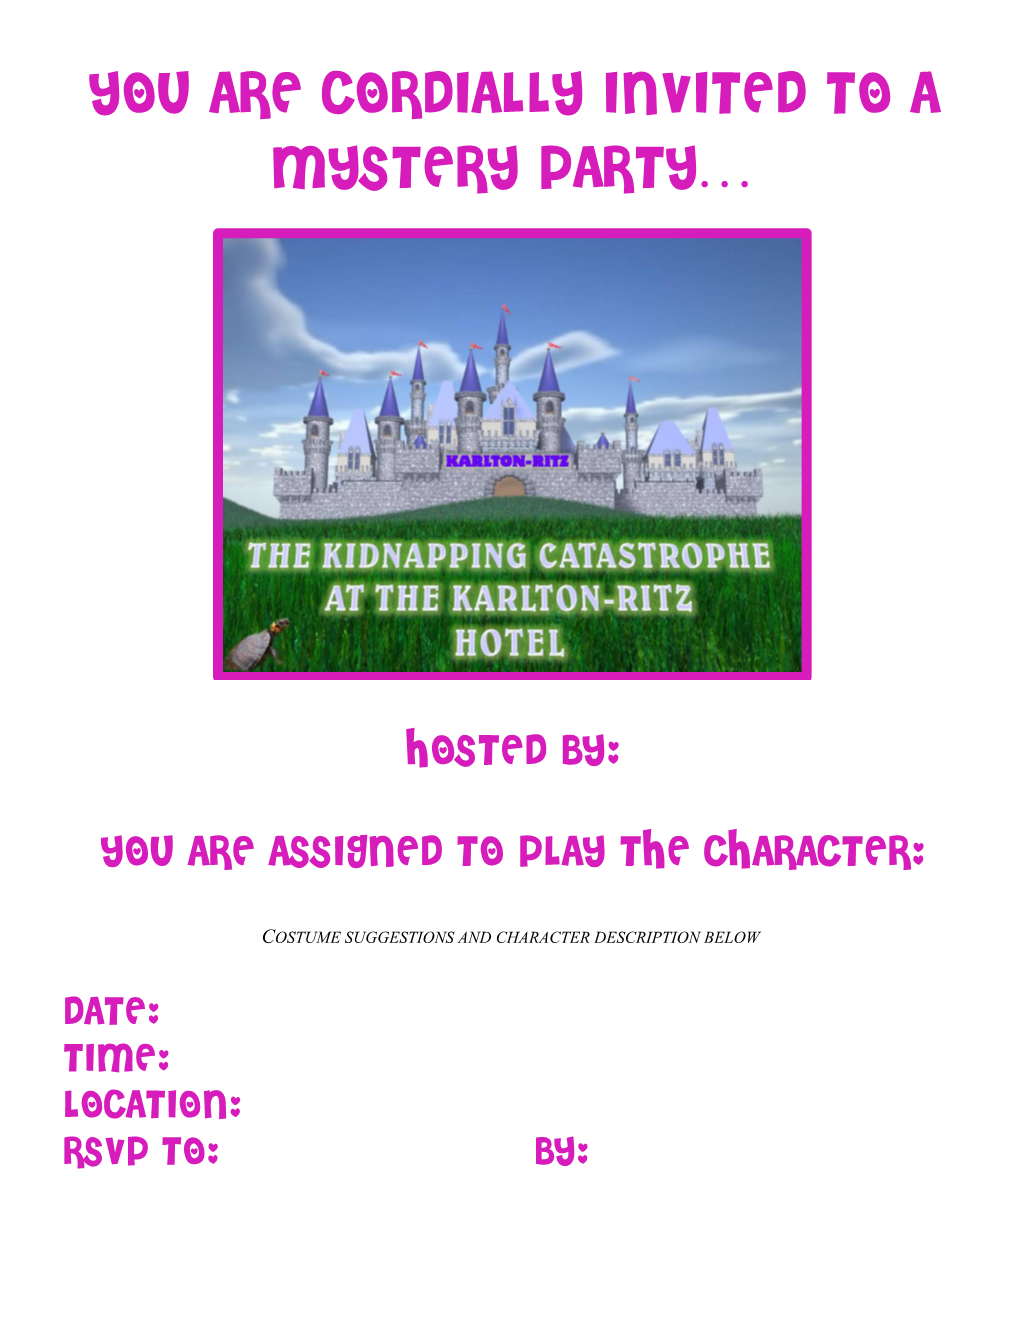 You Are Cordially Invited to a Mystery Party…